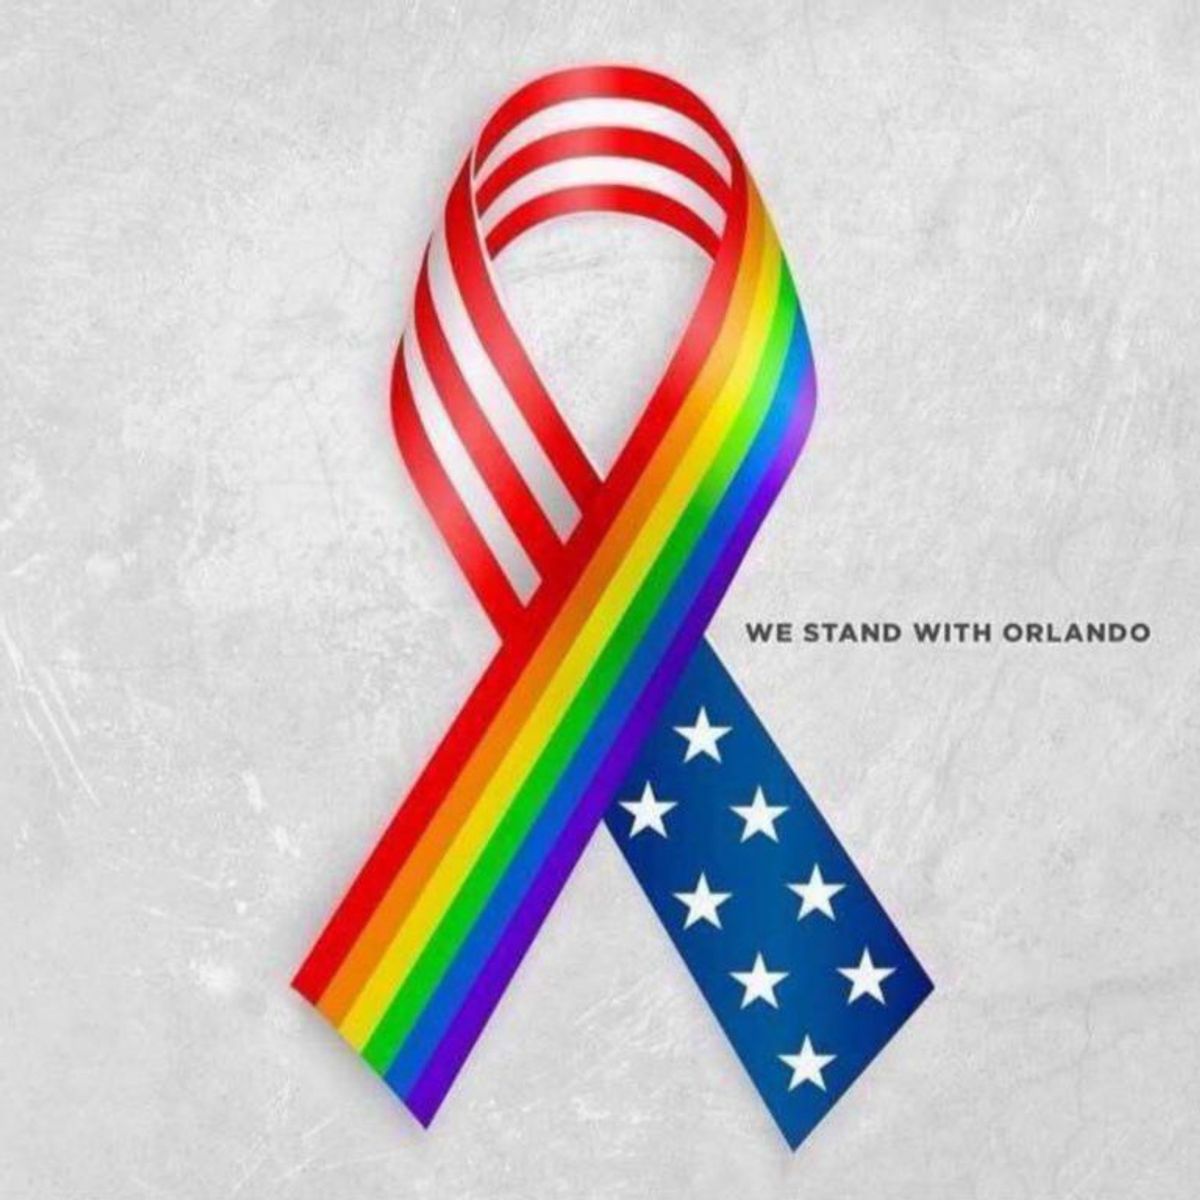 49 people killed and several others injured at an Orlando night club June 12th 2016